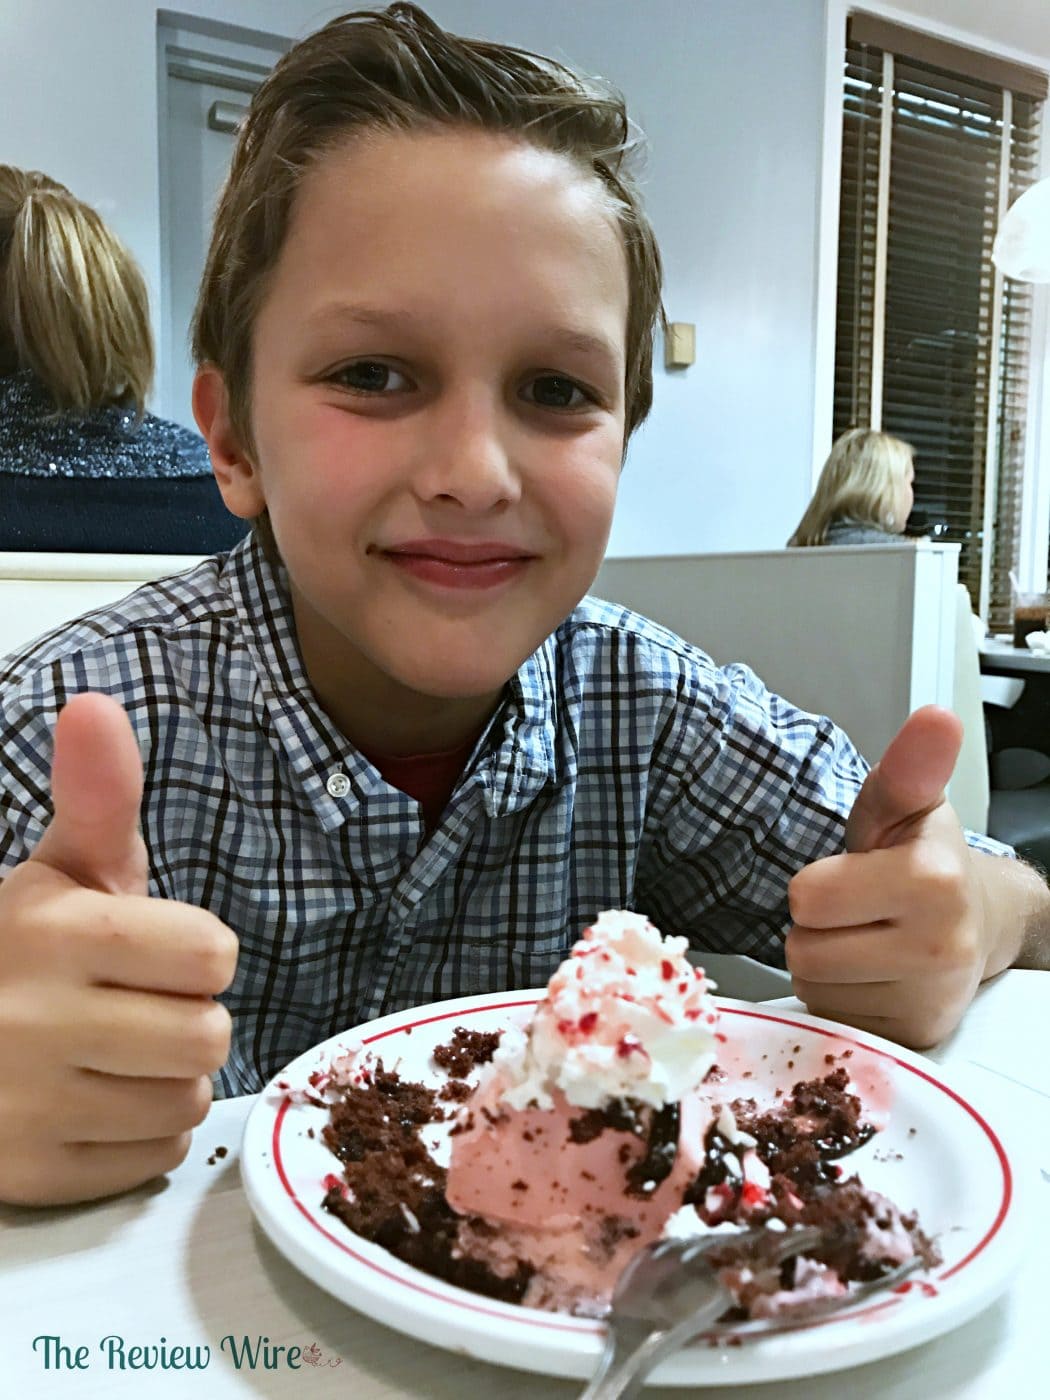 Trying the Peppermint Hot Fudge Cake